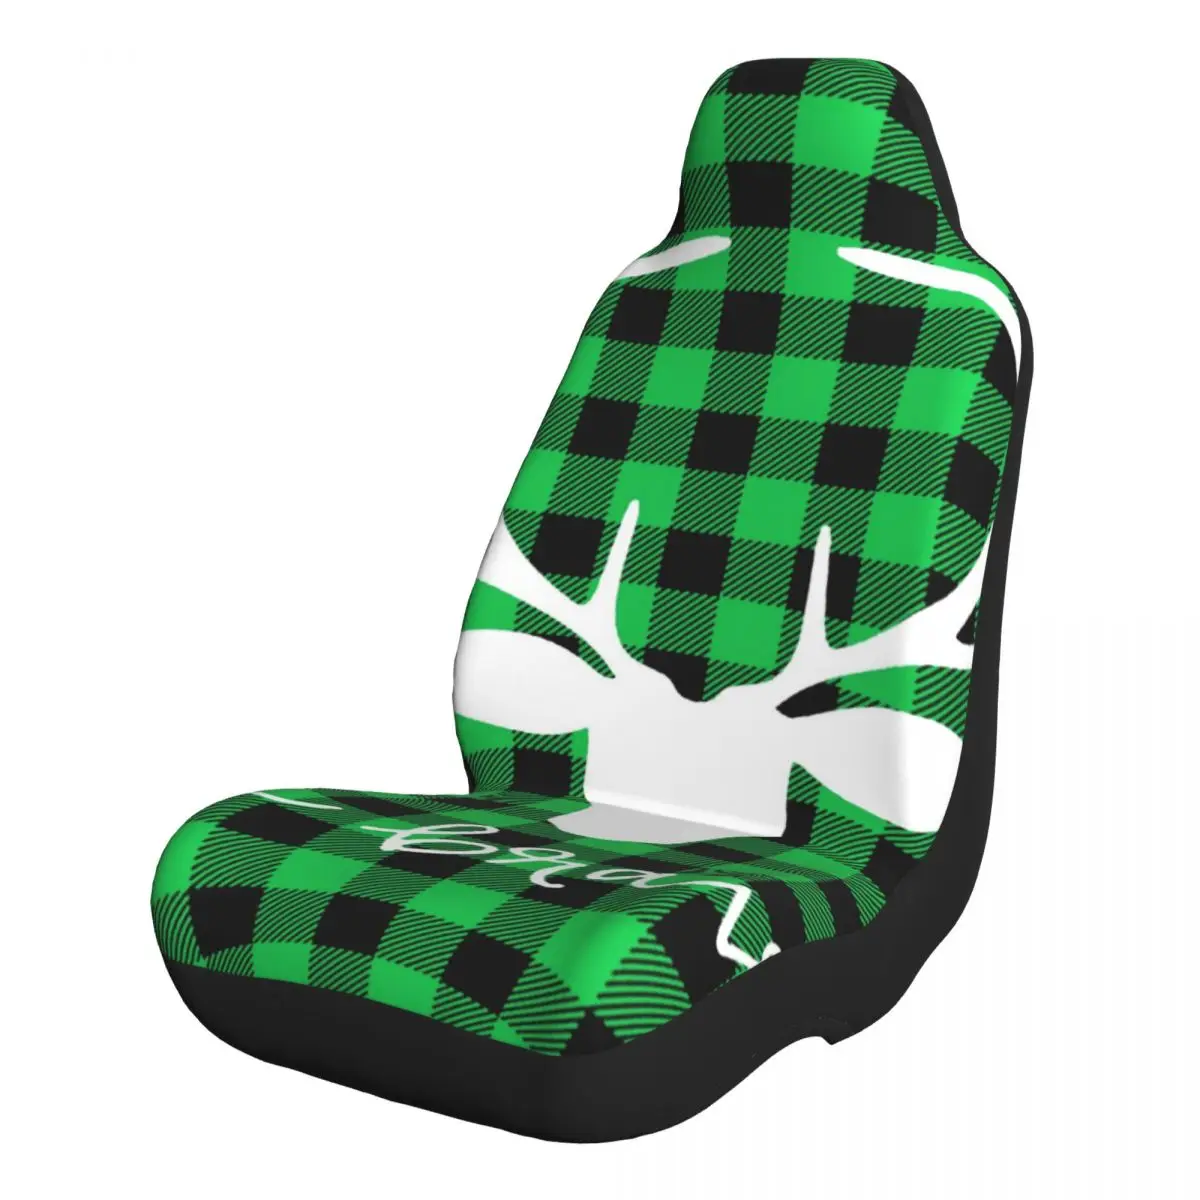 

Black Green Plaid Moose Universal Car Seat Covers Front Seats Protectors Cover for Truck Van SUV Seat Protecto Accessories